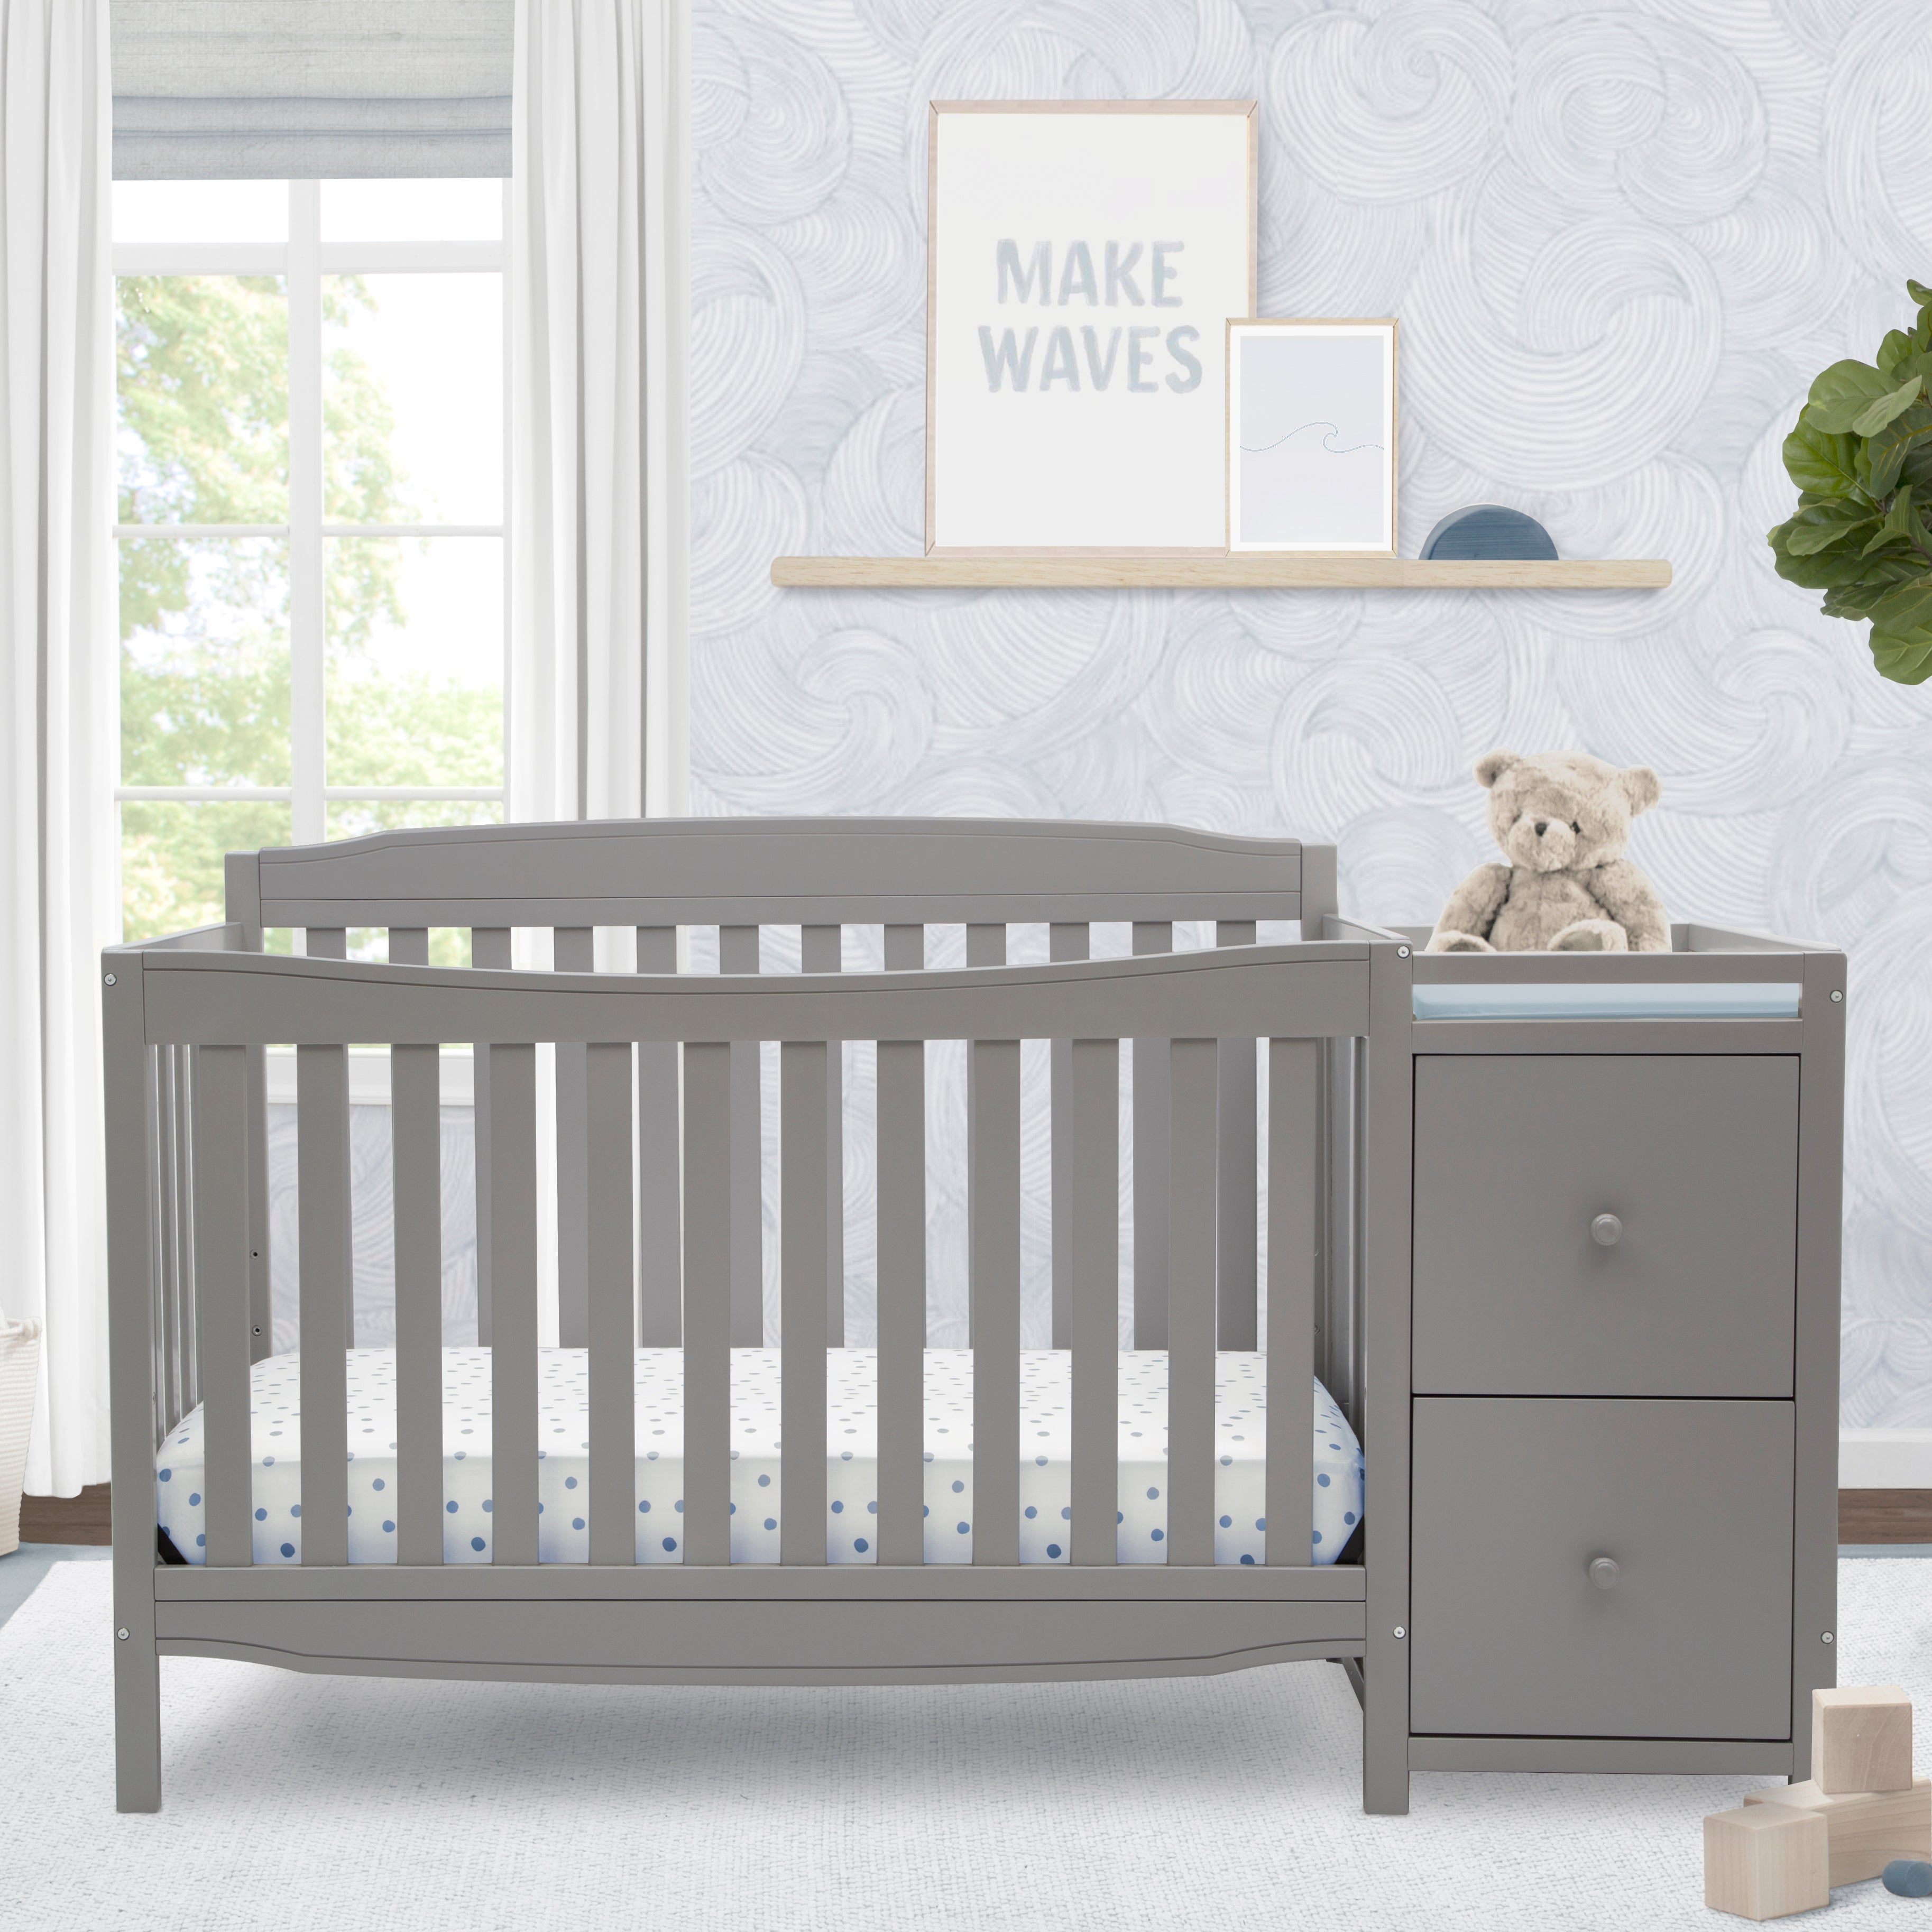 delta 4 in 1 crib with changing table instructions